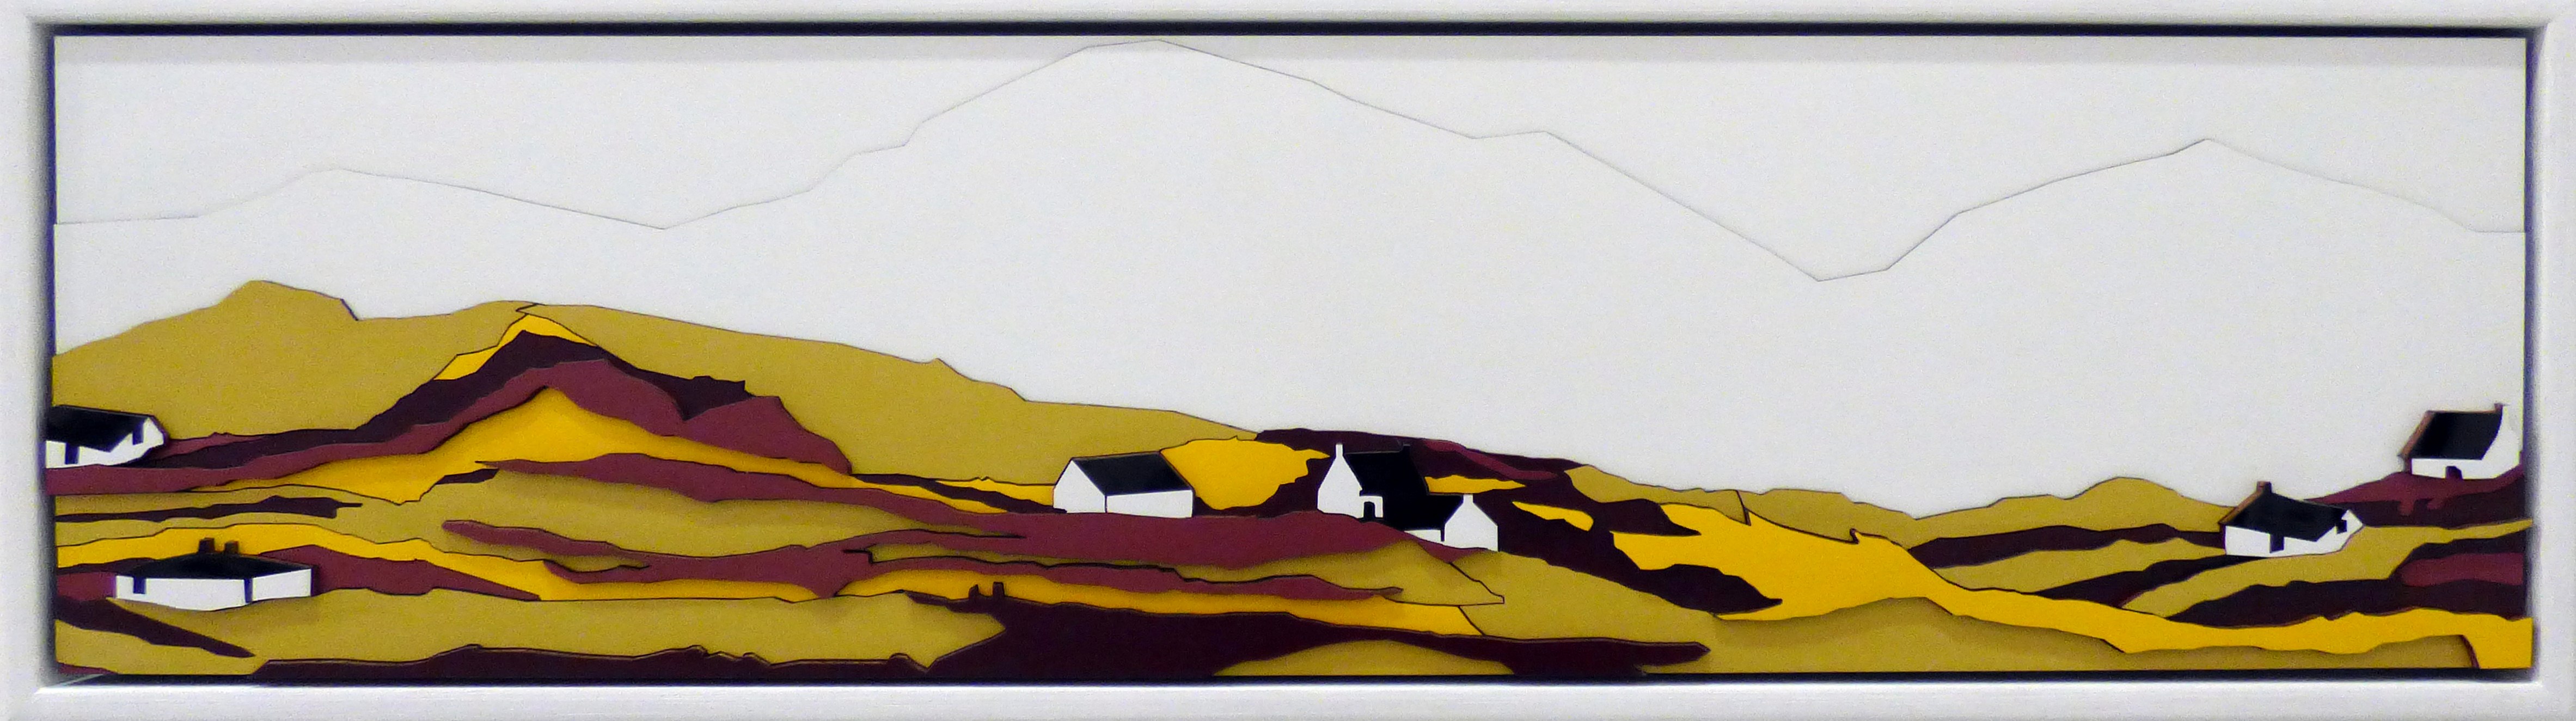 ELGOL, SKYE (SCOTLAND) by Clare Willard, coloured laminate and wood, CRAFTED exhibition, Kirkby Gallery, 2016